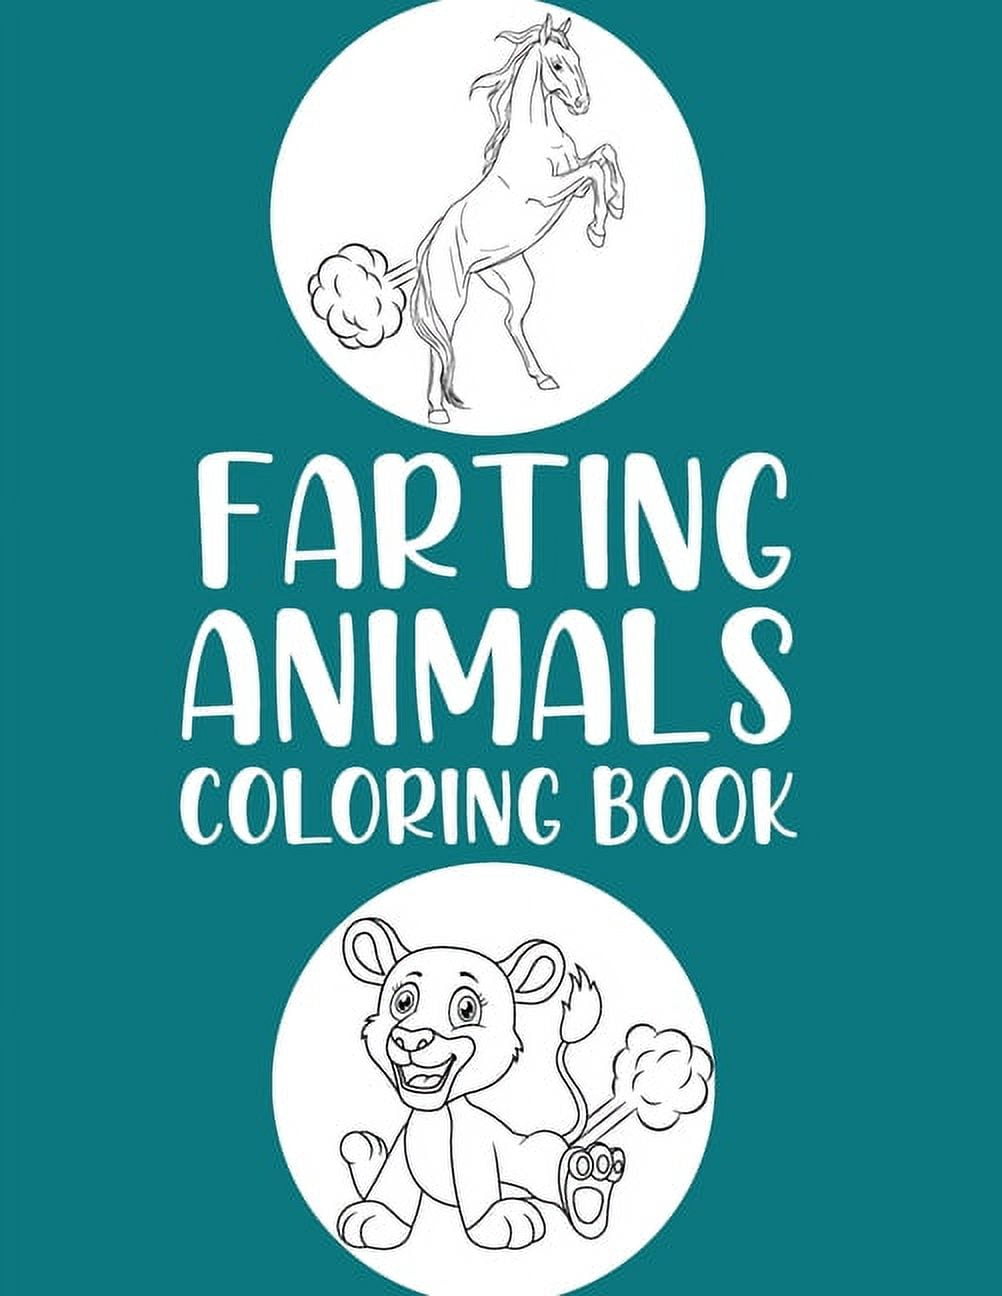 Color By Number for Kids: The Farting Animal Coloring Activity Book for  Kids: Cute Farting Animals - Funny Coloring Books for Kids (kids coloring  books ages 2-4 4-8 8-10 9-12 animals) by